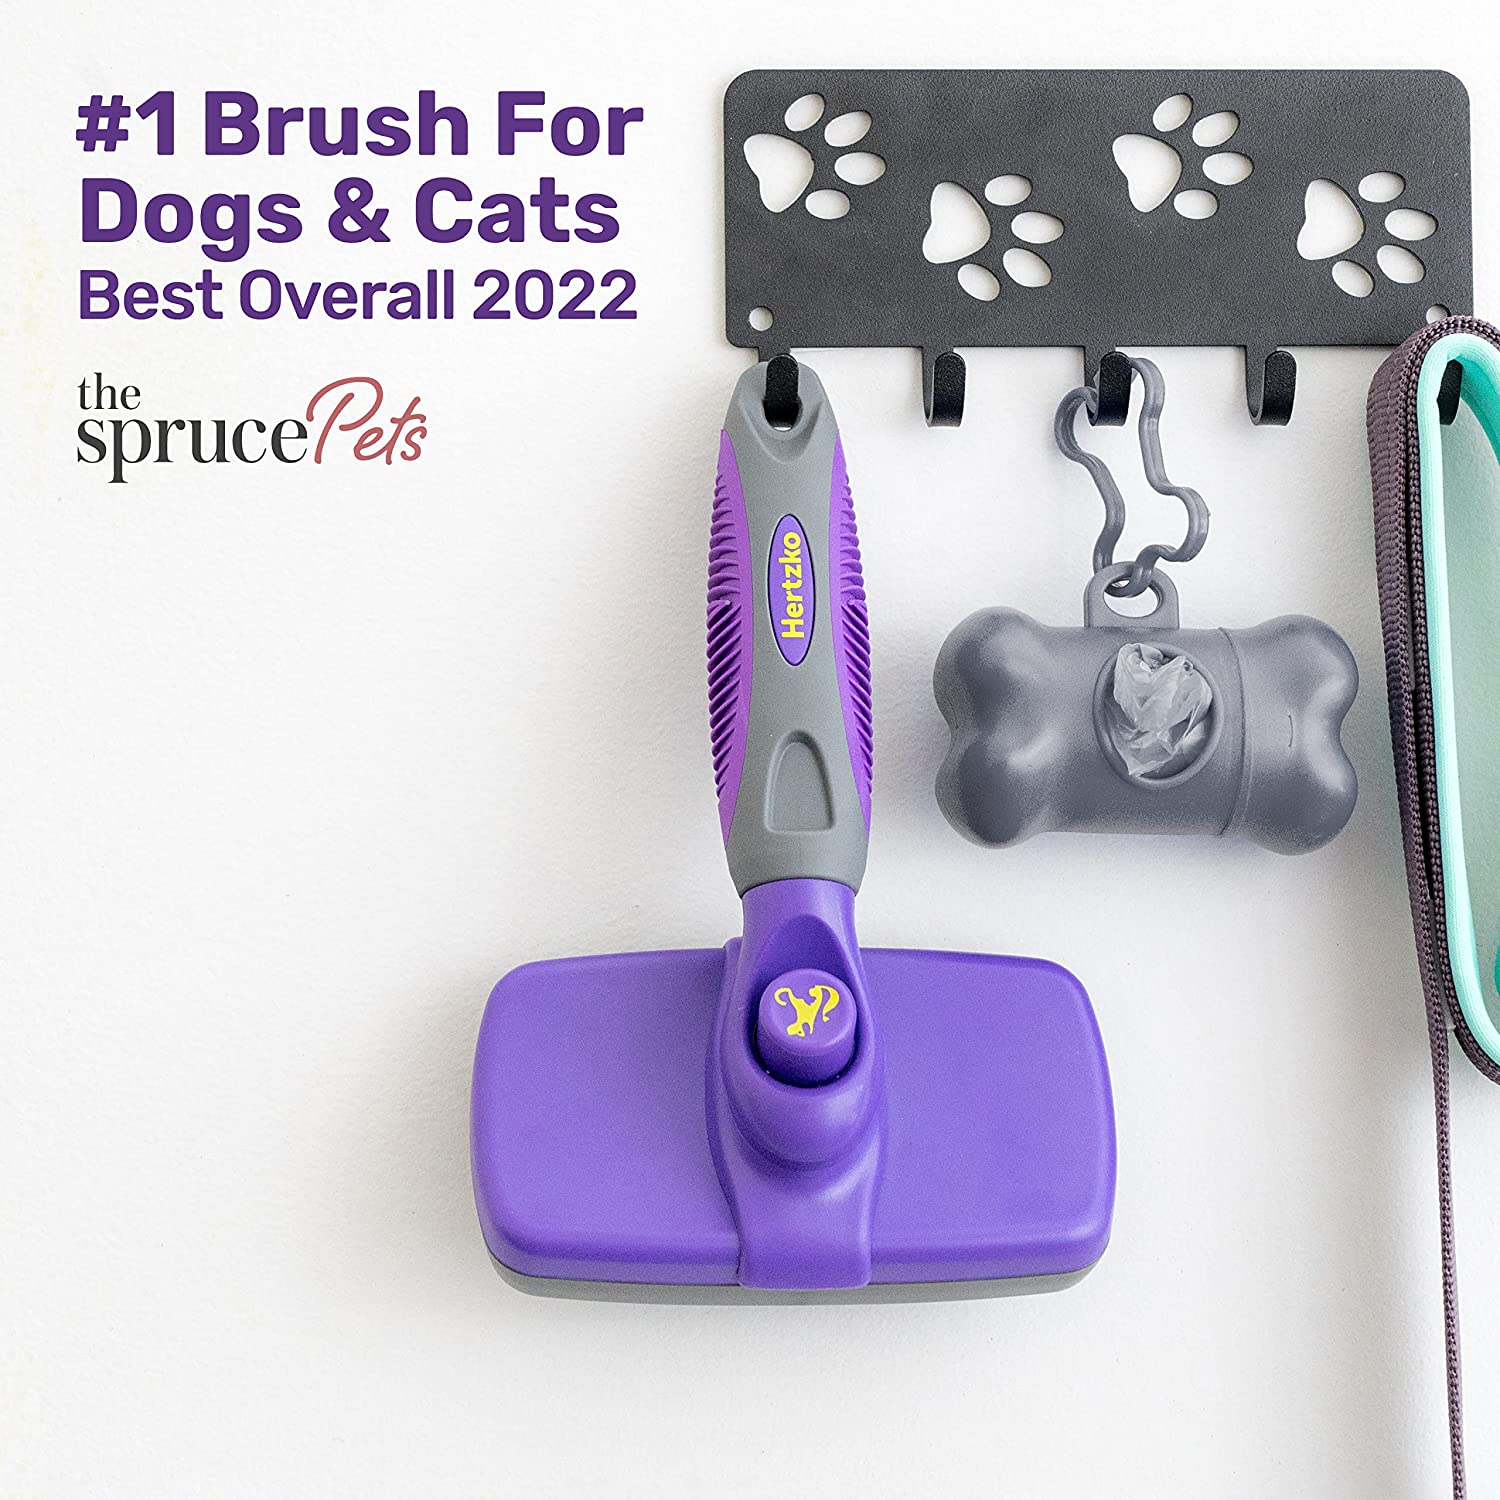 Brushes For Dogs